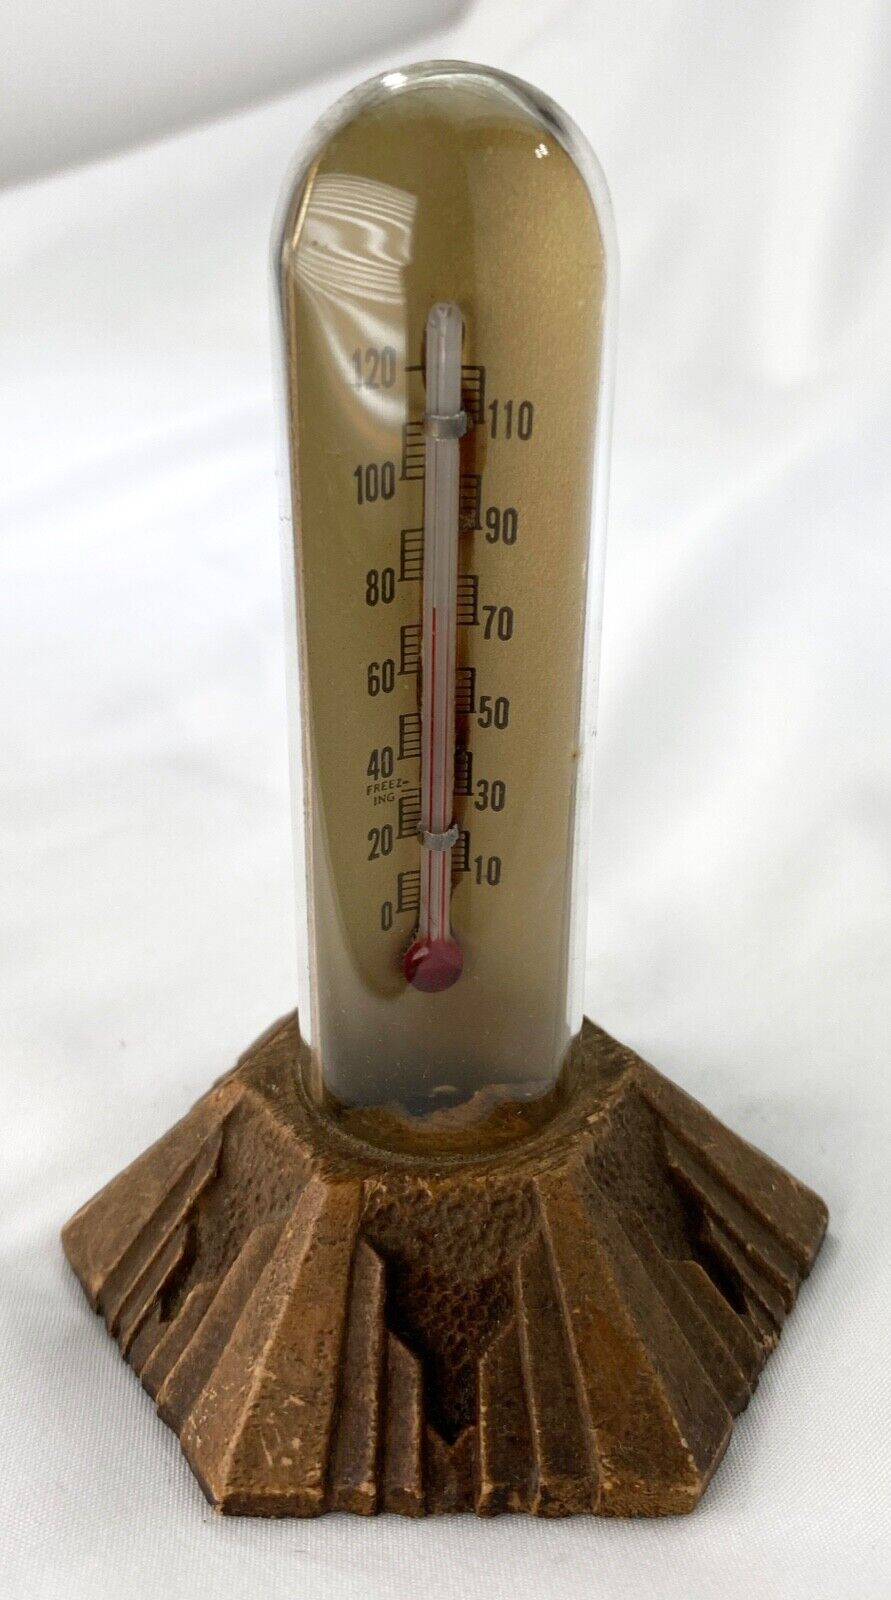 J.H. Becker & Sons Funeral Home Advertising Thermometer 1930s Art Deco Base WI